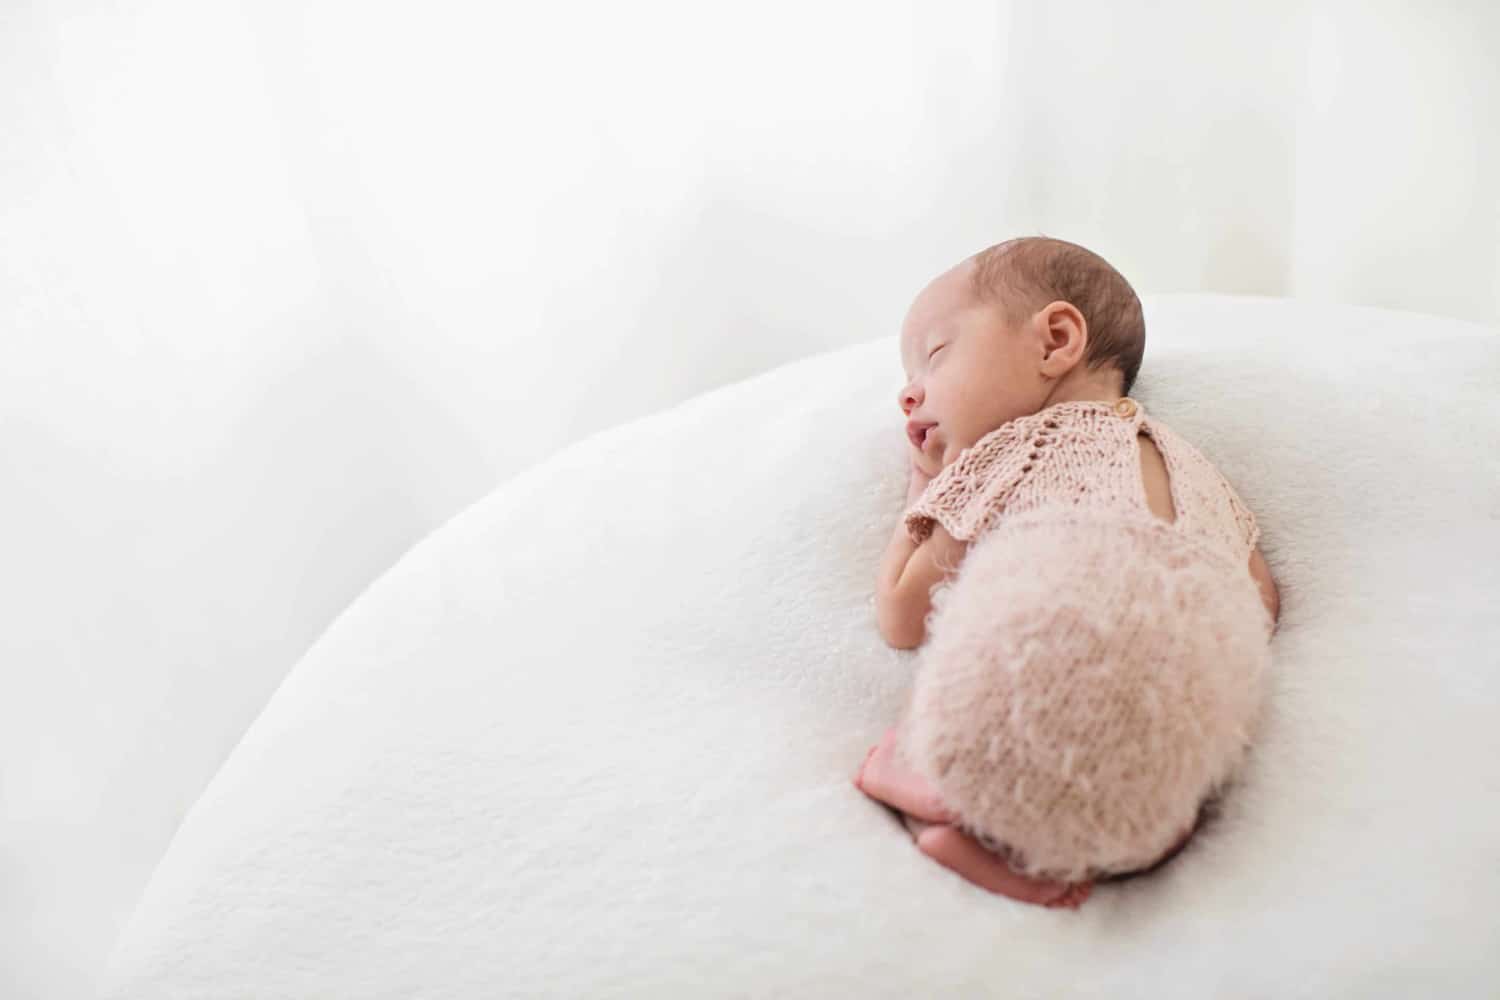 A baby snuggles on a white pillow wearing a pink knit outfit.